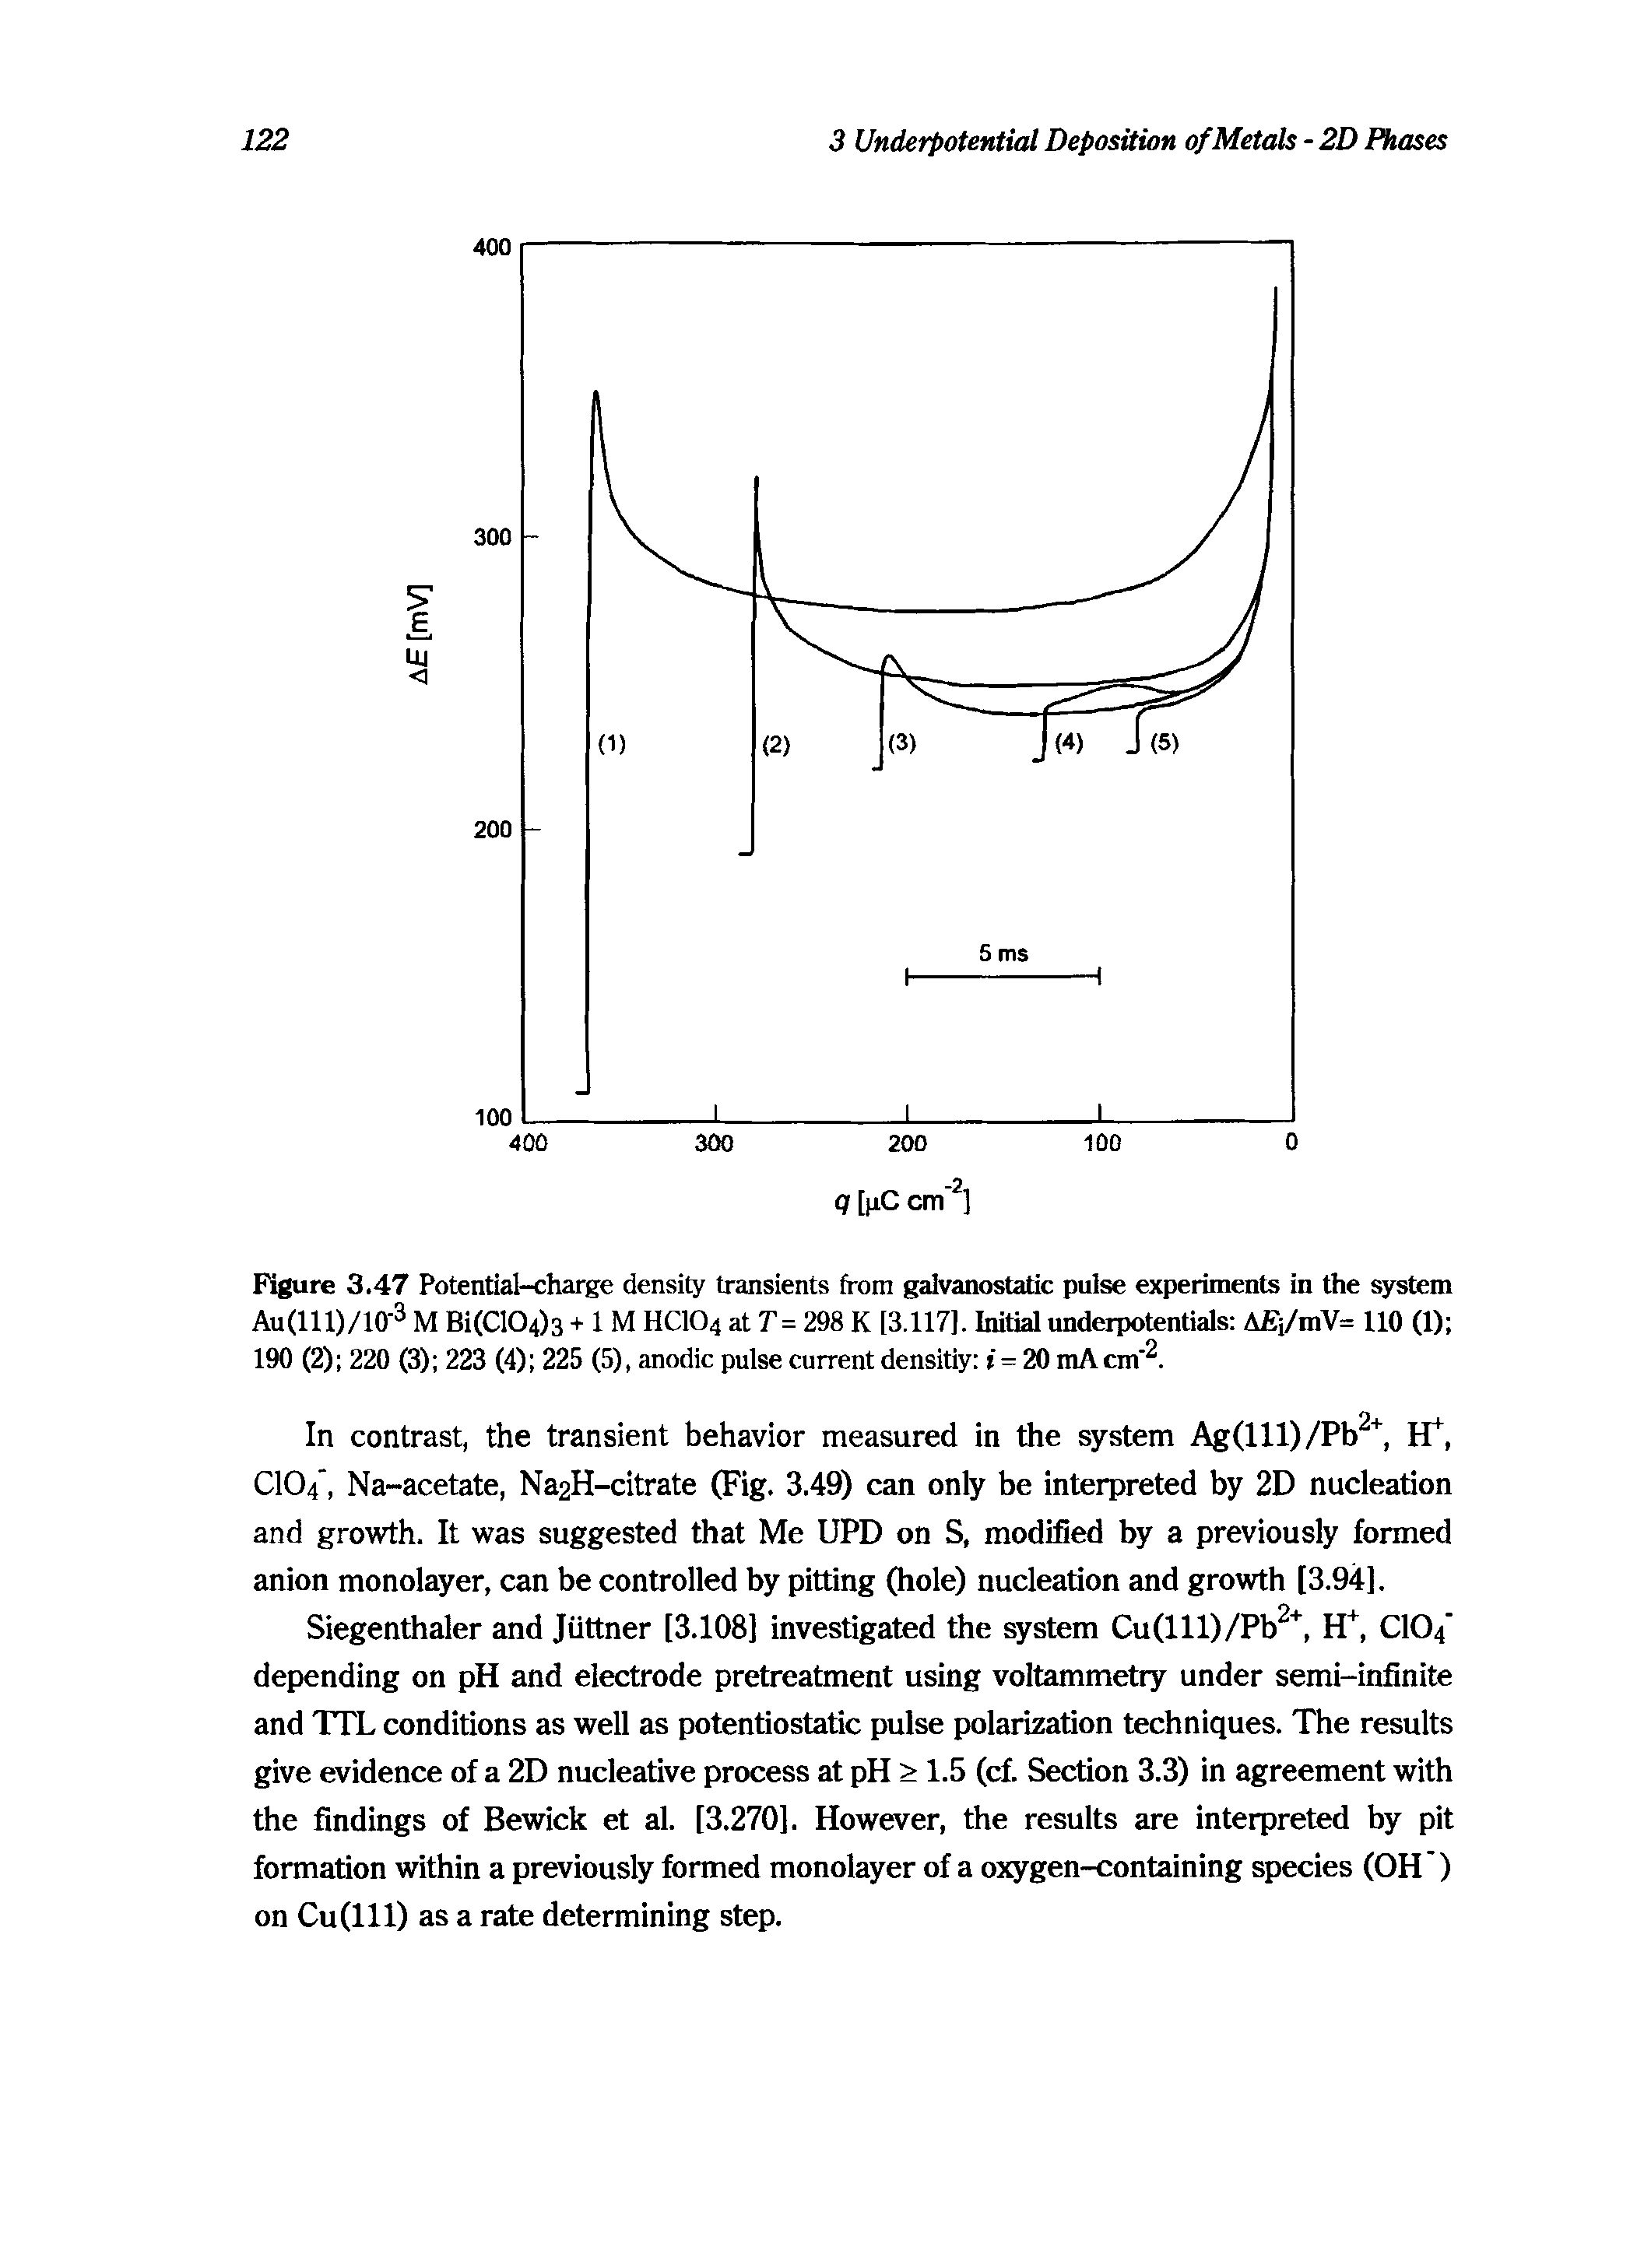 Figure 3.47 Potential-charge density transients from galvanostatic pulse experiments in the system Au(111)/10-3 M Bi(C104)3 + 1 M HCIO4 at T= 298 K [3.117], Initial underpotentials A i/mV= 110 (1) 190 (2) 220 (3) 223 (4) 225 (5), anodic pulse current densitiy i = 20 mA cm. ...